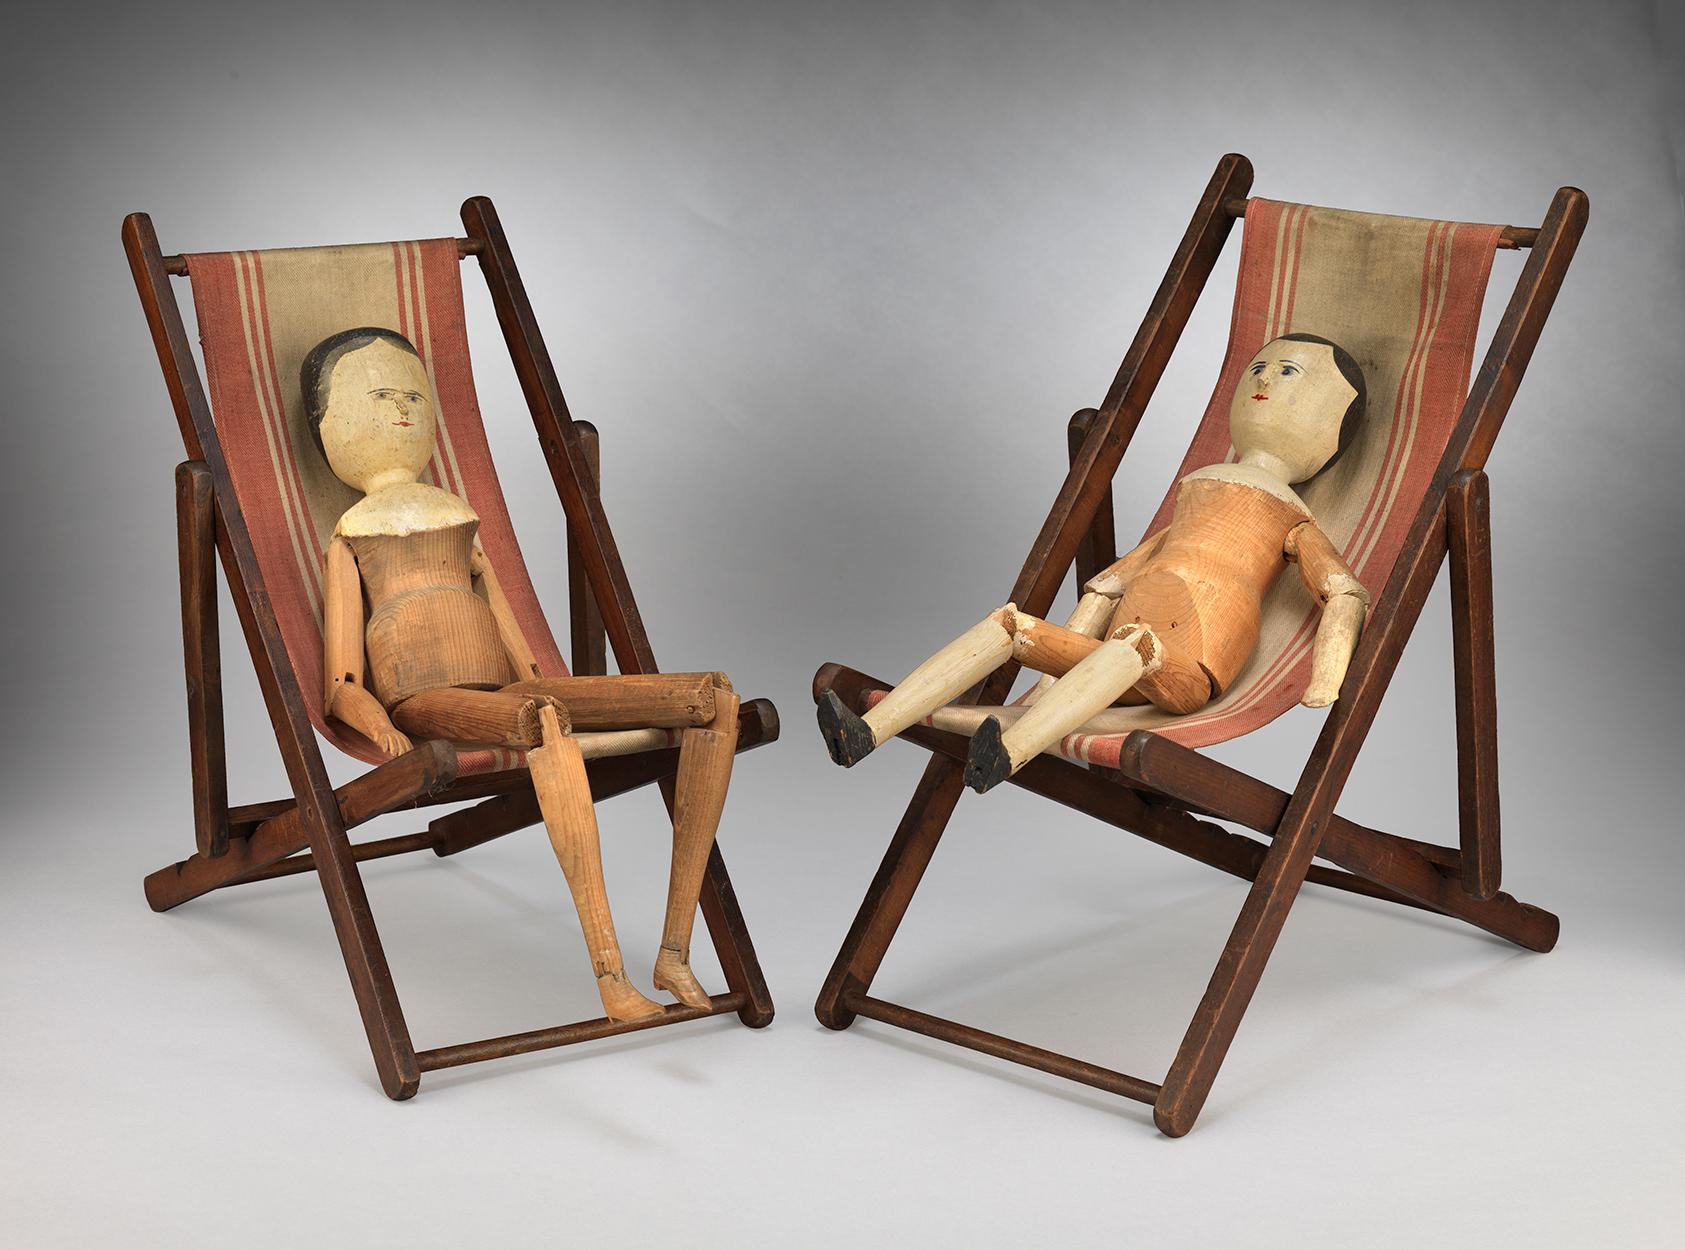 An Unusual Pair of Miniature Deck Chairs